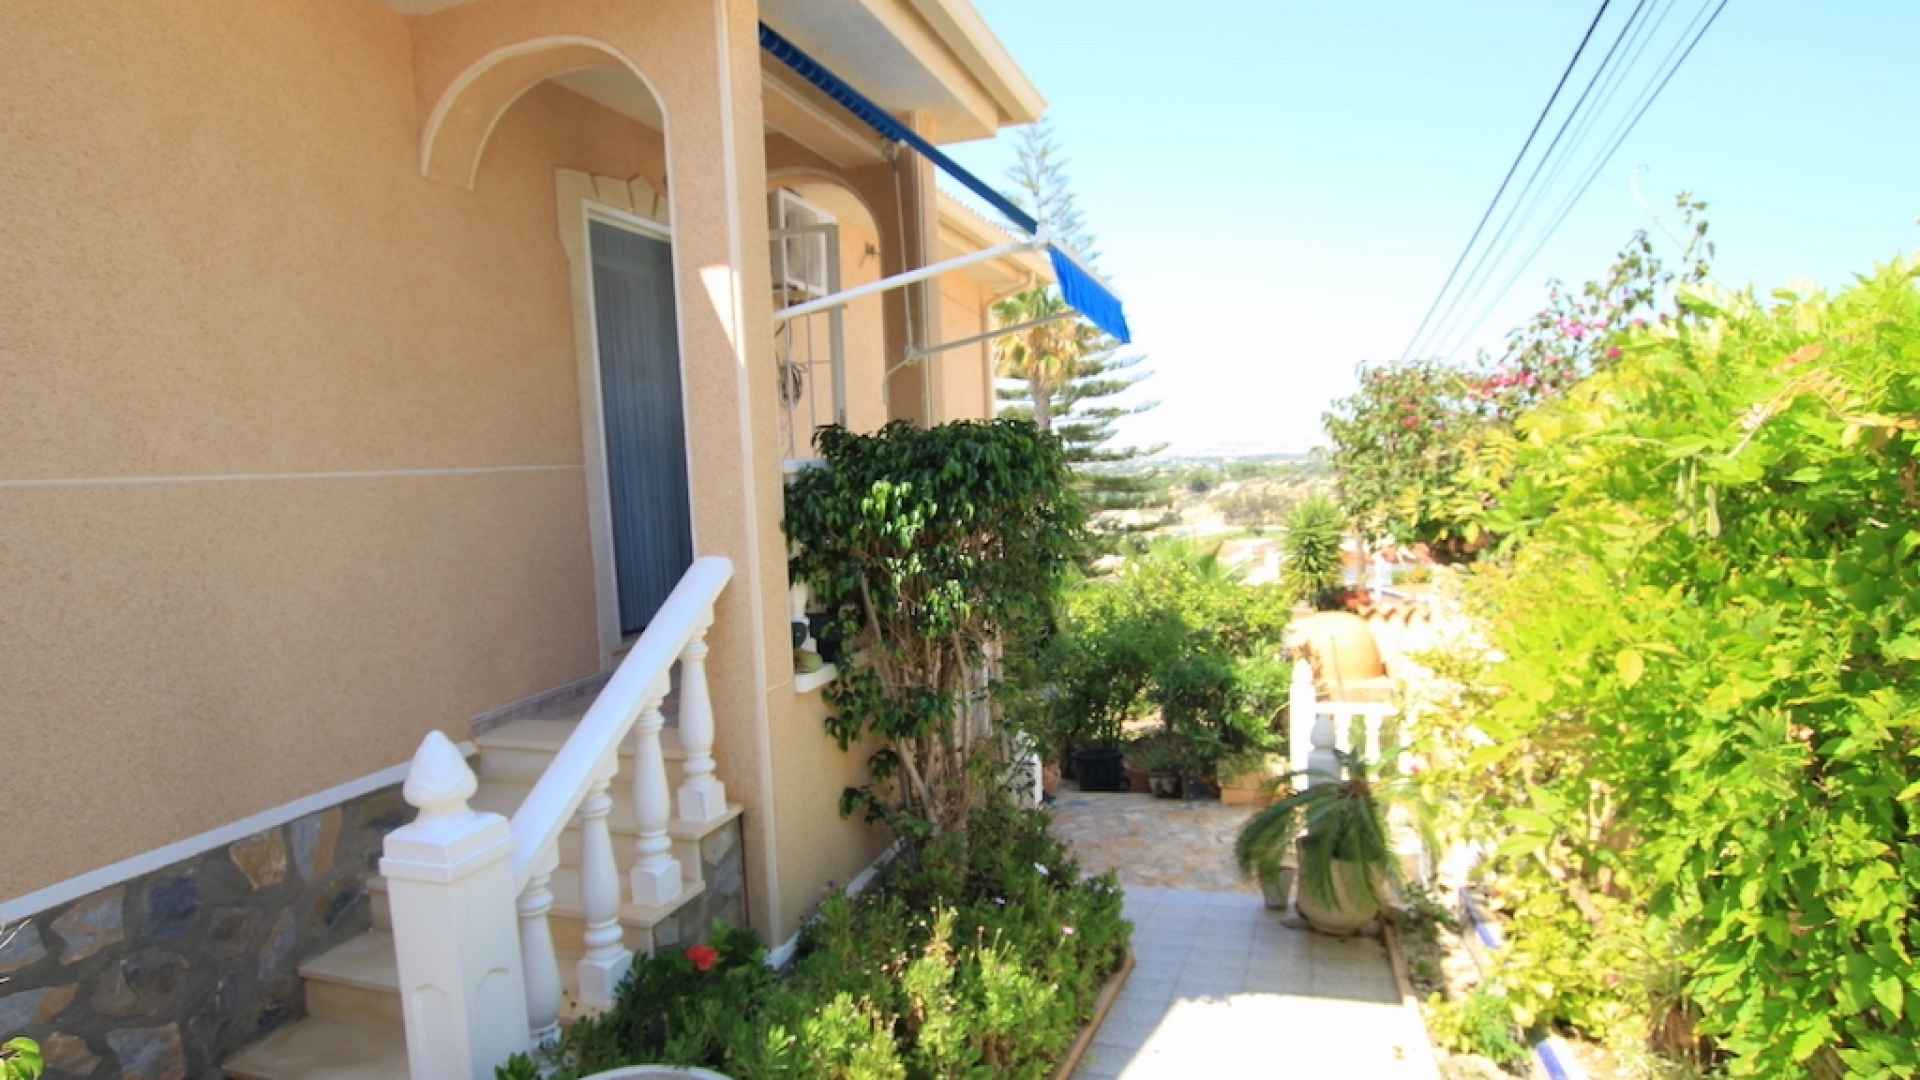 48133_spacious_210sqm_detached_villa_with_internal_garage___private_pool_260623093703_img_5870